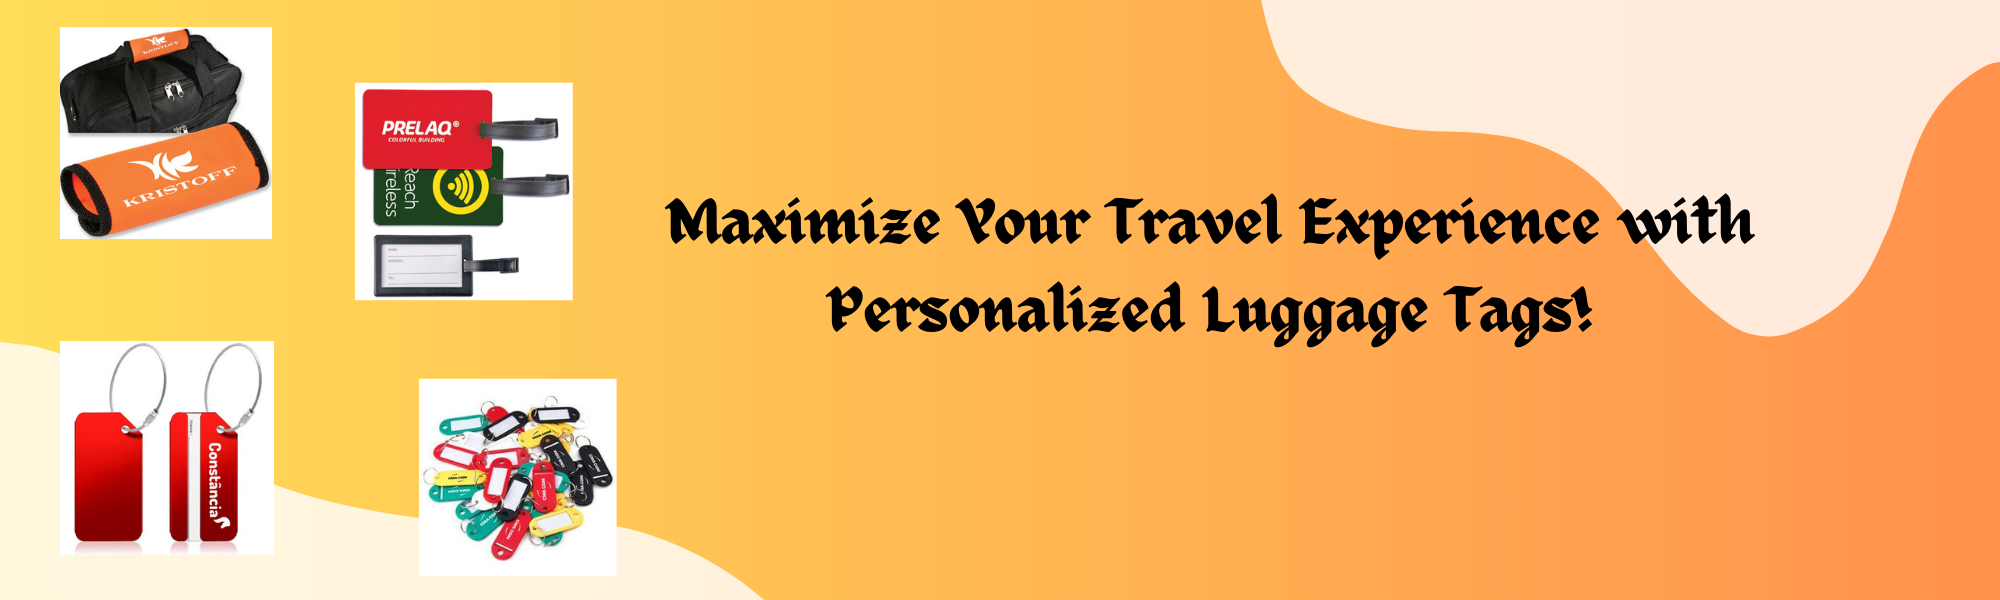 Maximize Your Travel Experience with Personalized Luggage Tags! - Openinfocompany.com